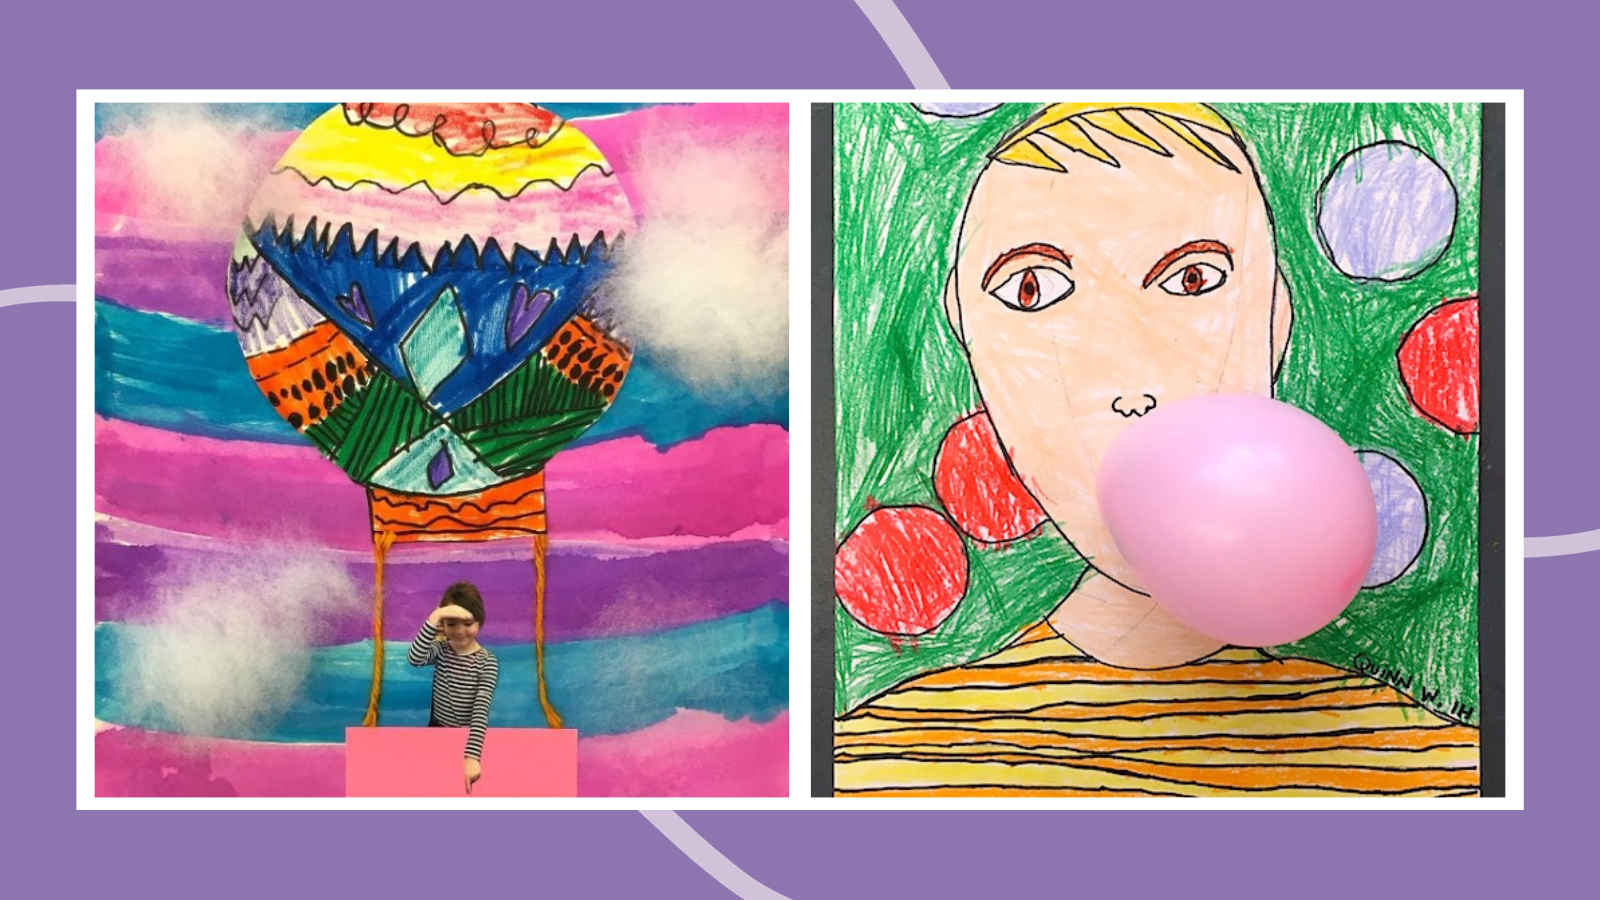 Examples of first grade art projects including a self portrait made with a balloon for bubble gum and a picture of a child in a hot air balloon painting with cotton clouds.